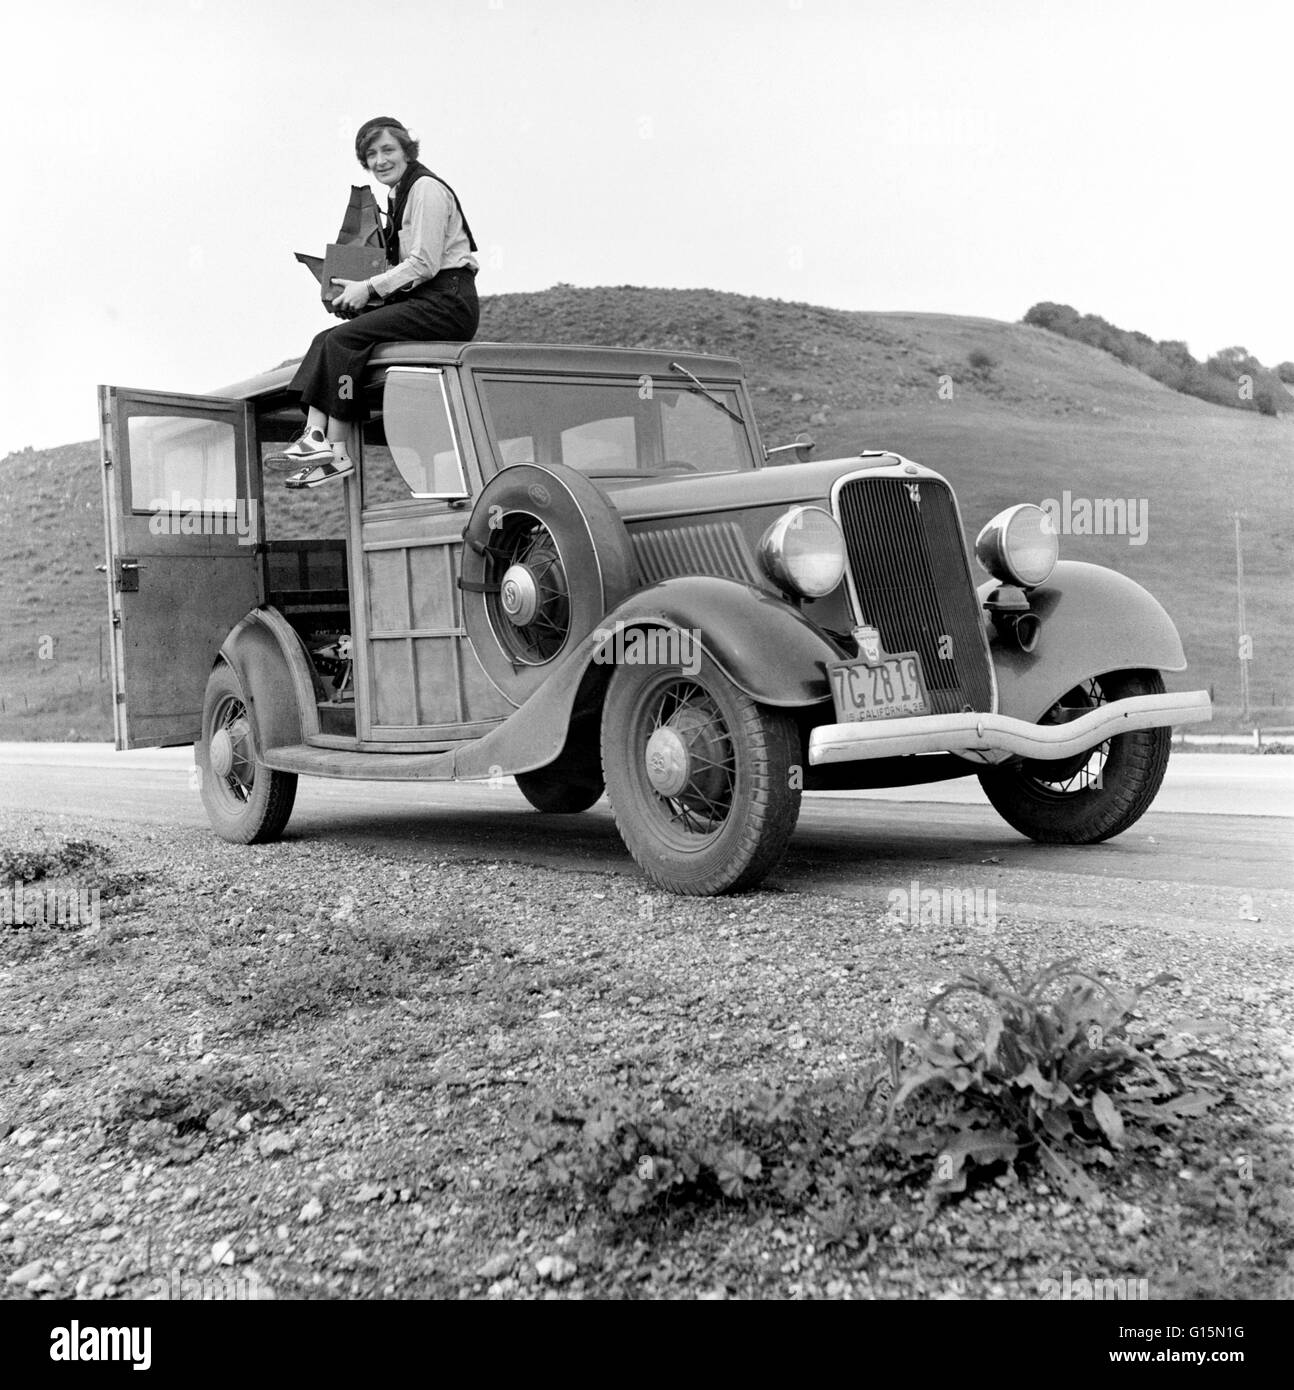 Dorothea Lange (May 26, 1895 - October 11, 1965) was an influential American documentary photographer and photojournalist. She contracted polio at age seven which left her with a weakened right leg and a permanent limp. She was educated in photography at Stock Photo